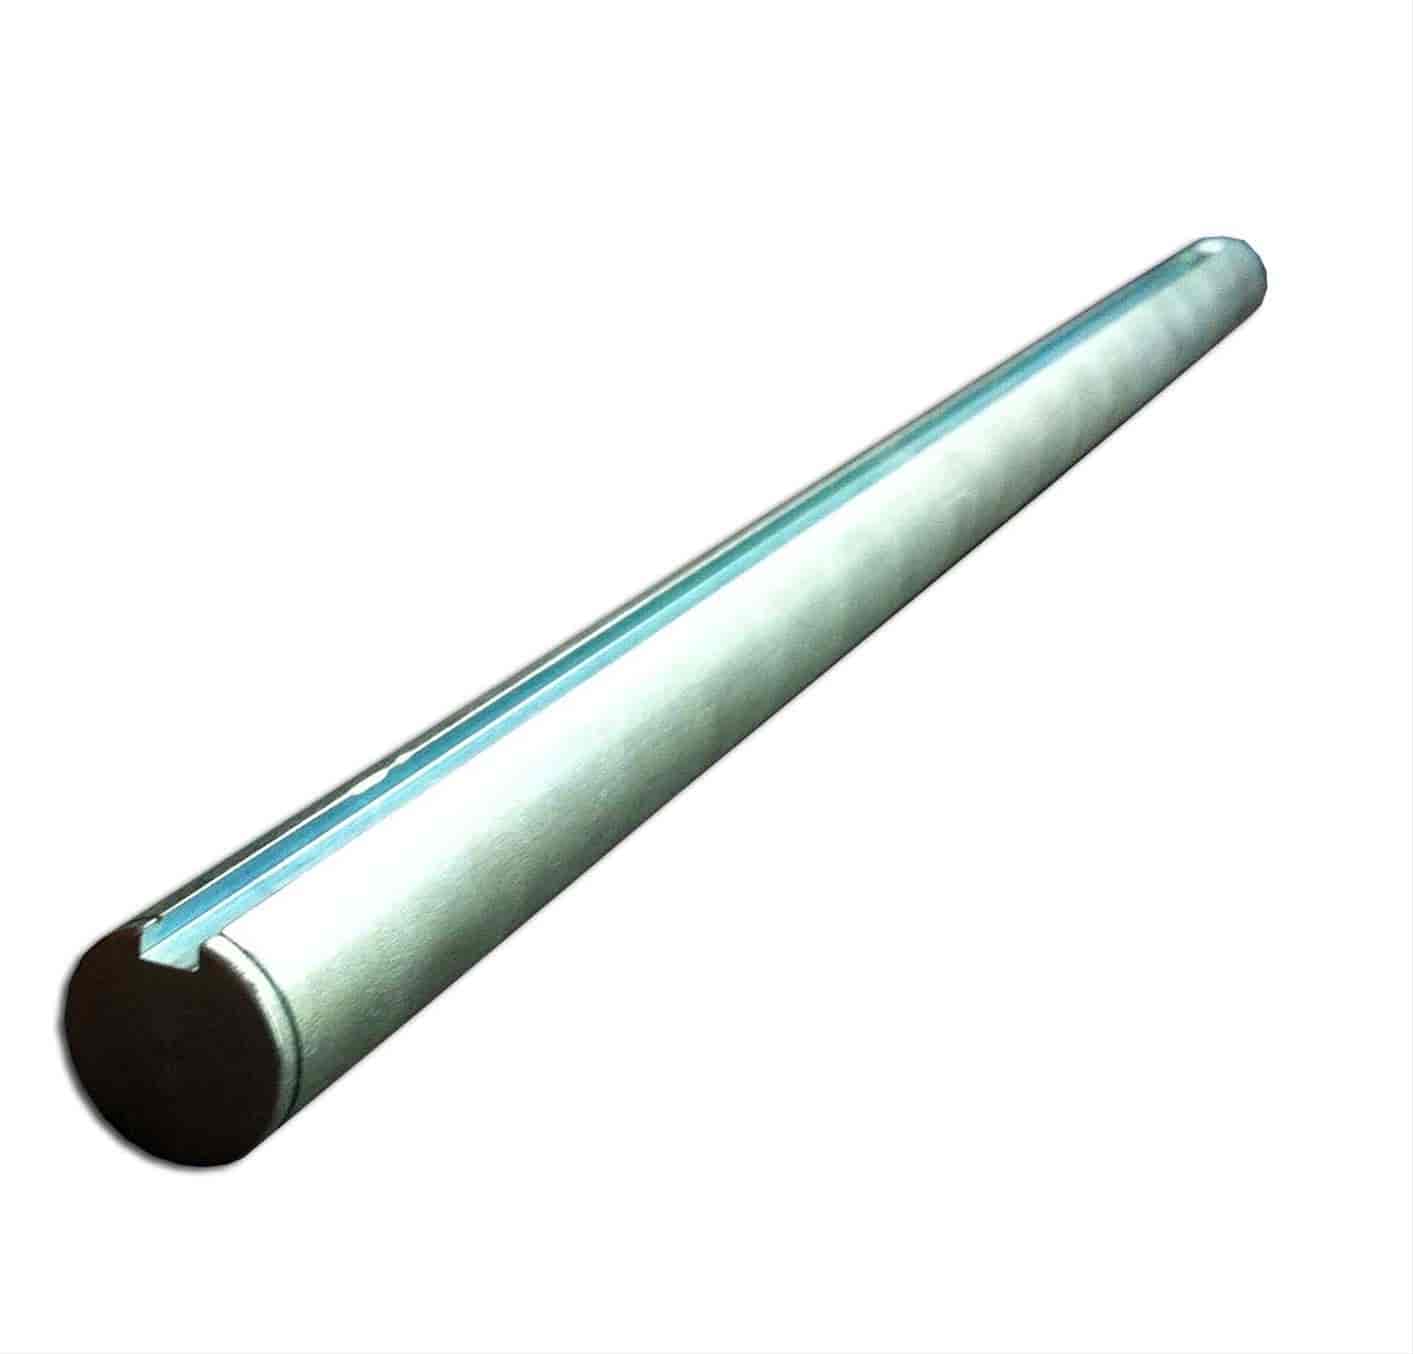 STEEL AXLE SOLID 40 L 1 D